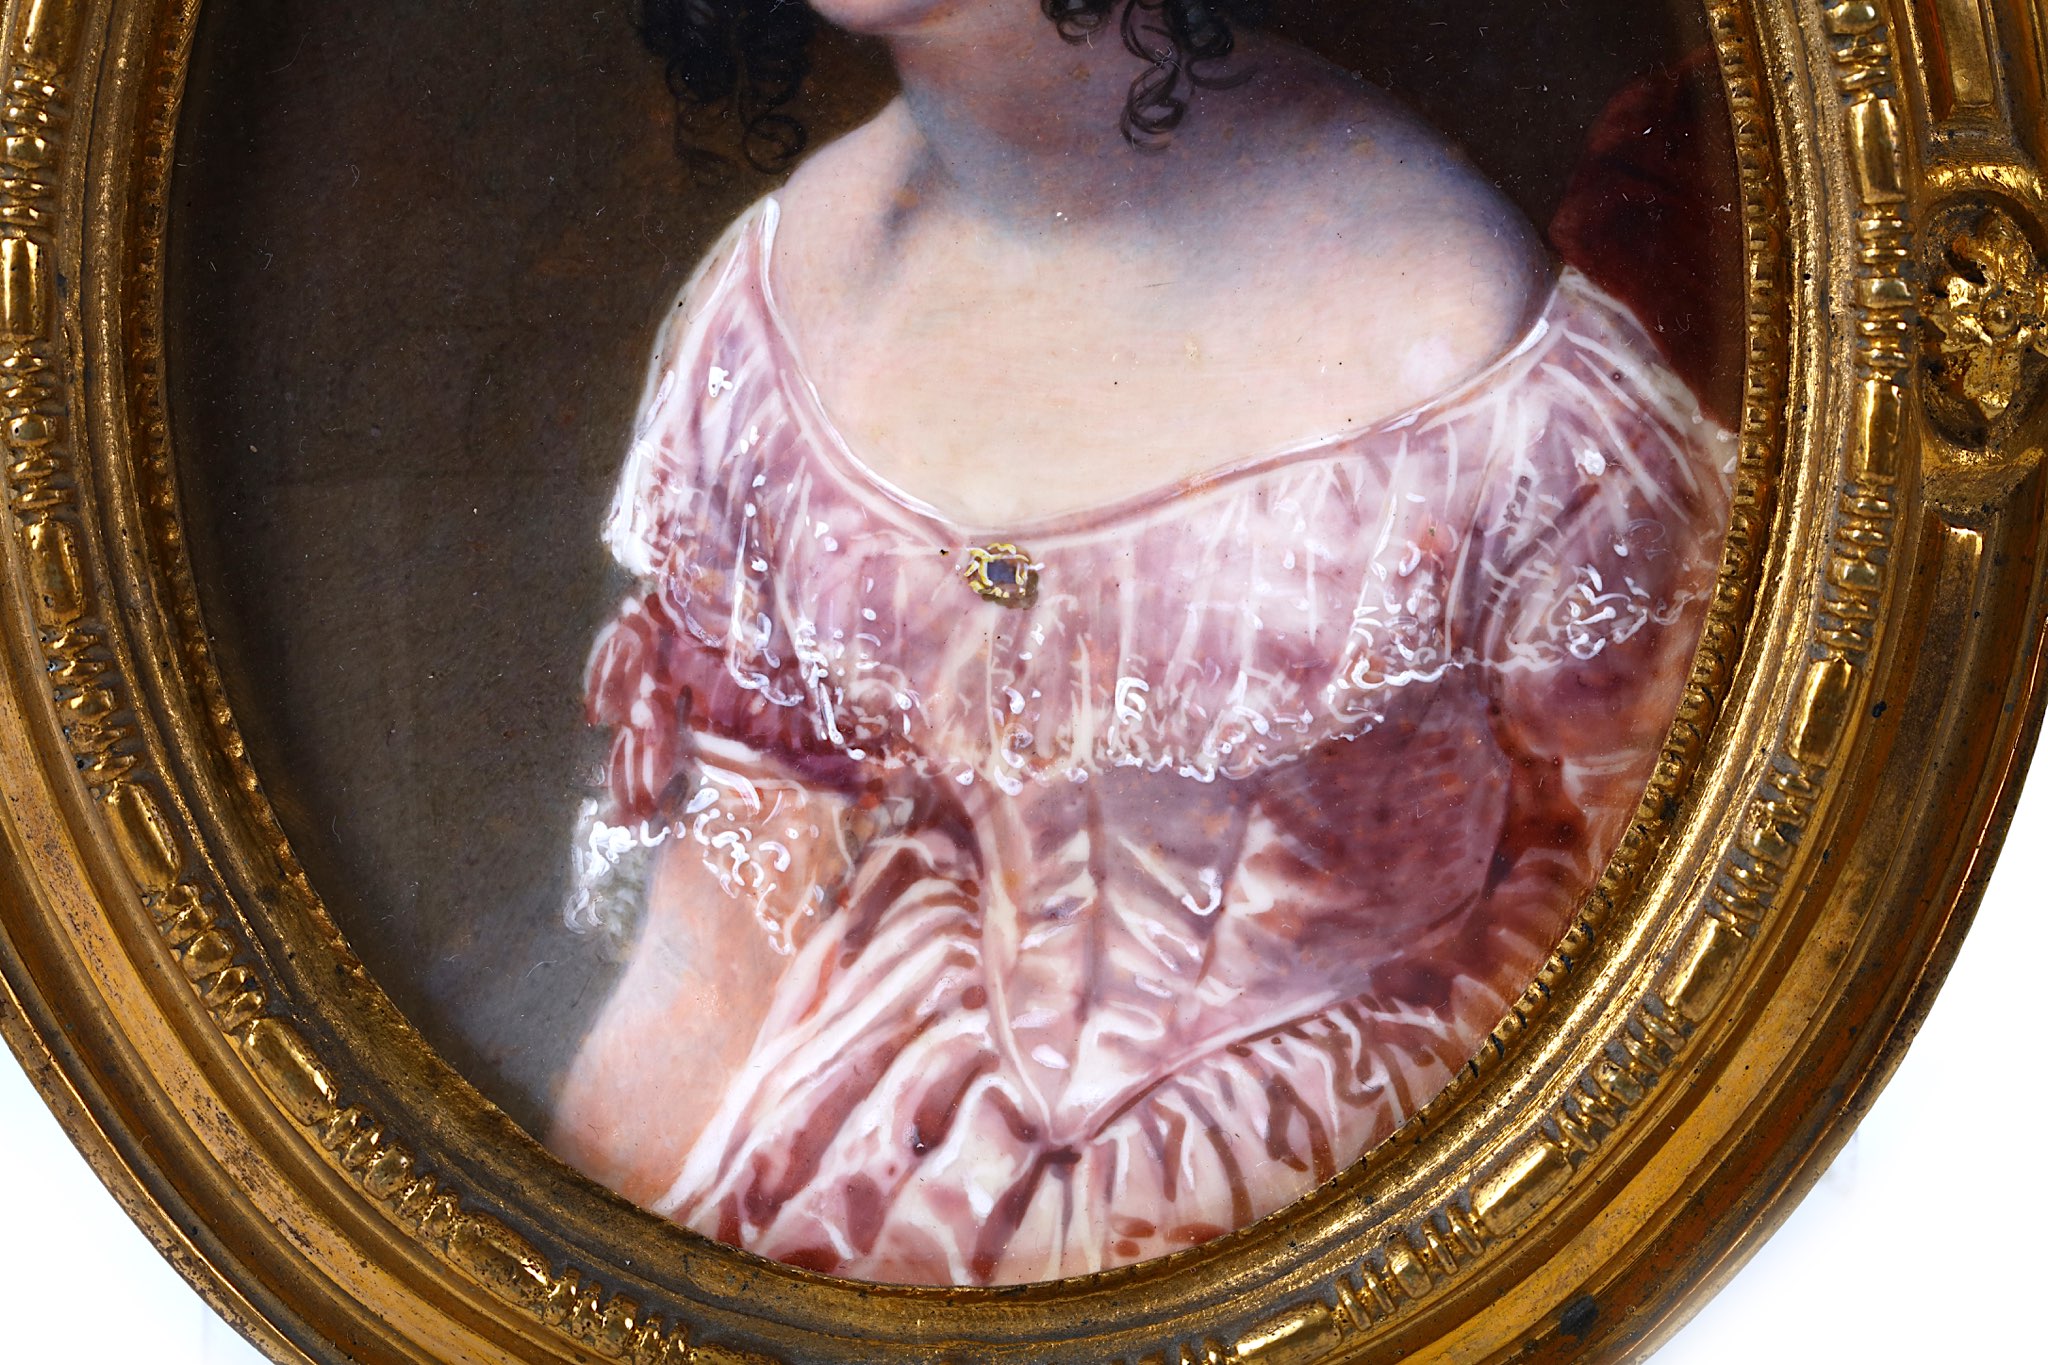 ROBERT THORBURN A.R.A. (1818-1885). Portrait miniature of a Lady, wearing a pink dress with white - Image 4 of 4